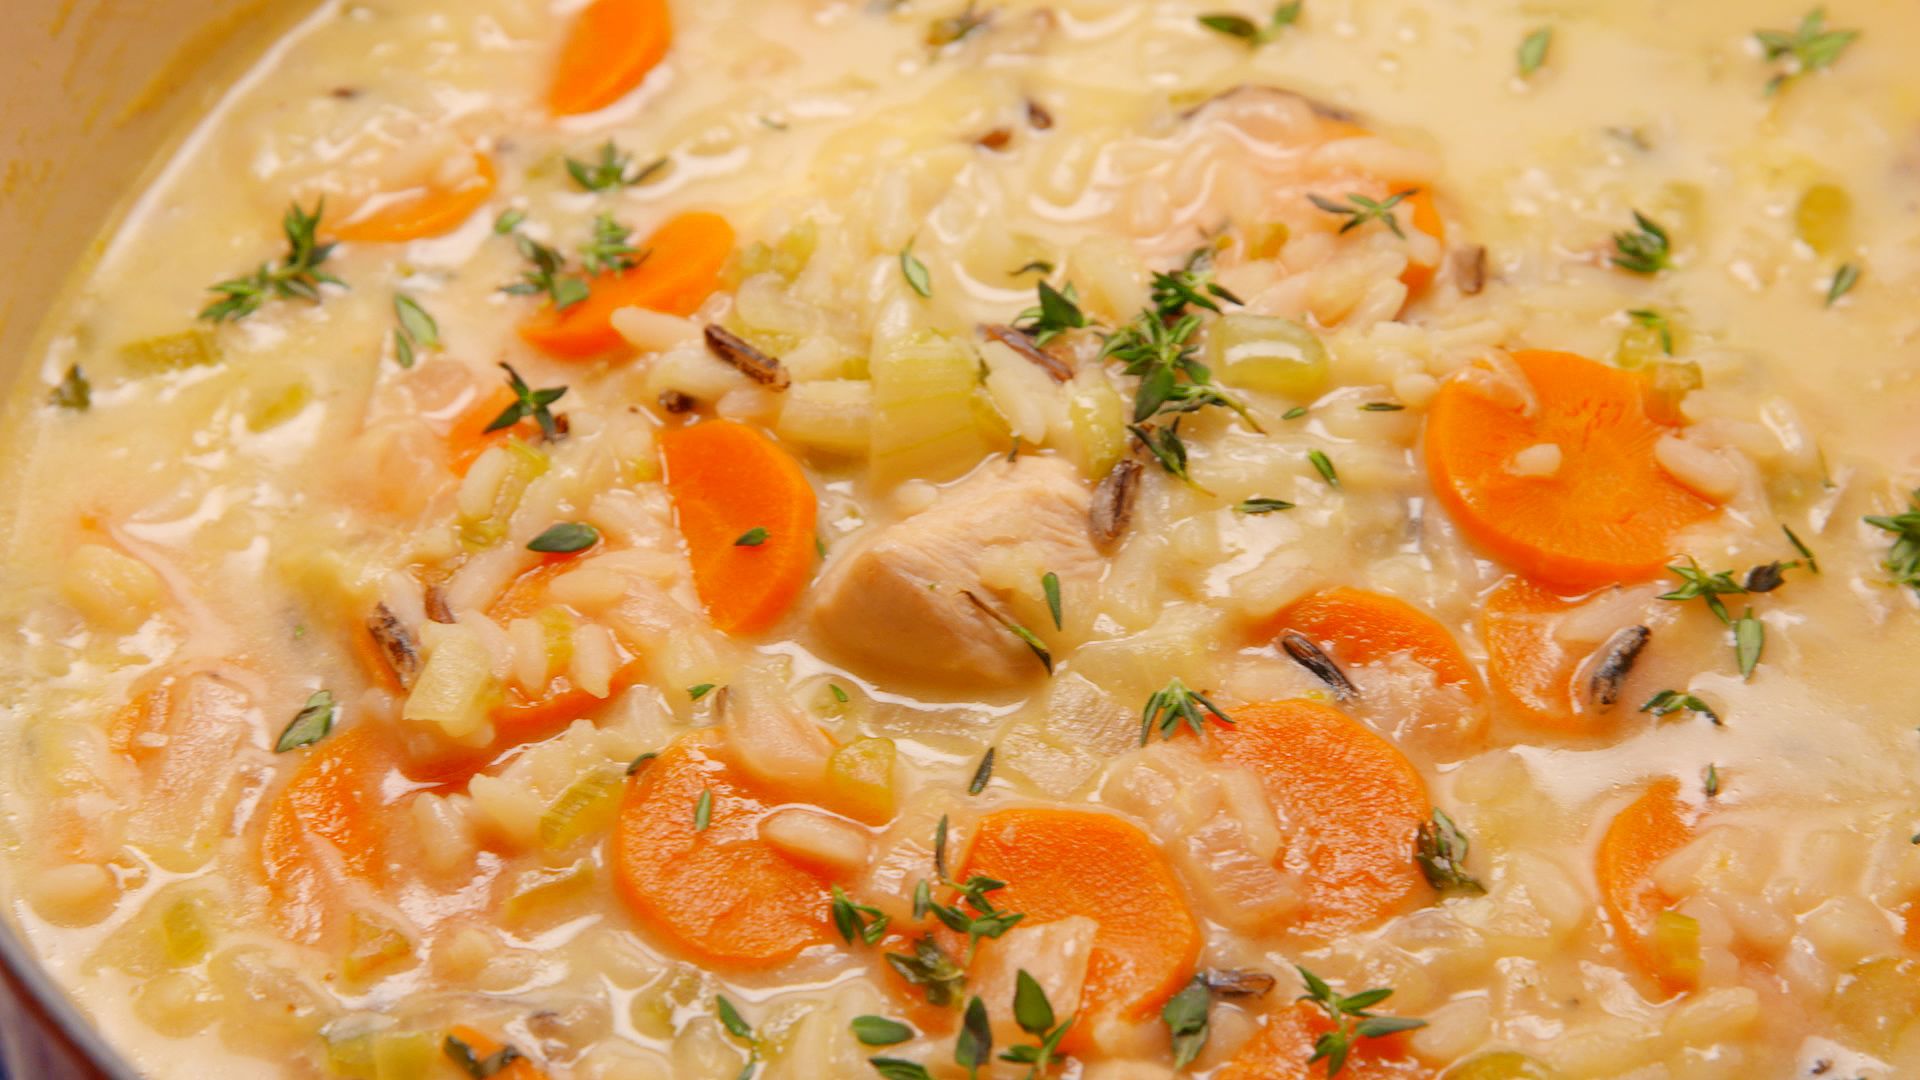 https://hips.hearstapps.com/delish/assets/17/07/1487103107-delish-creamy-chicken-and-rice-soup-1.jpg